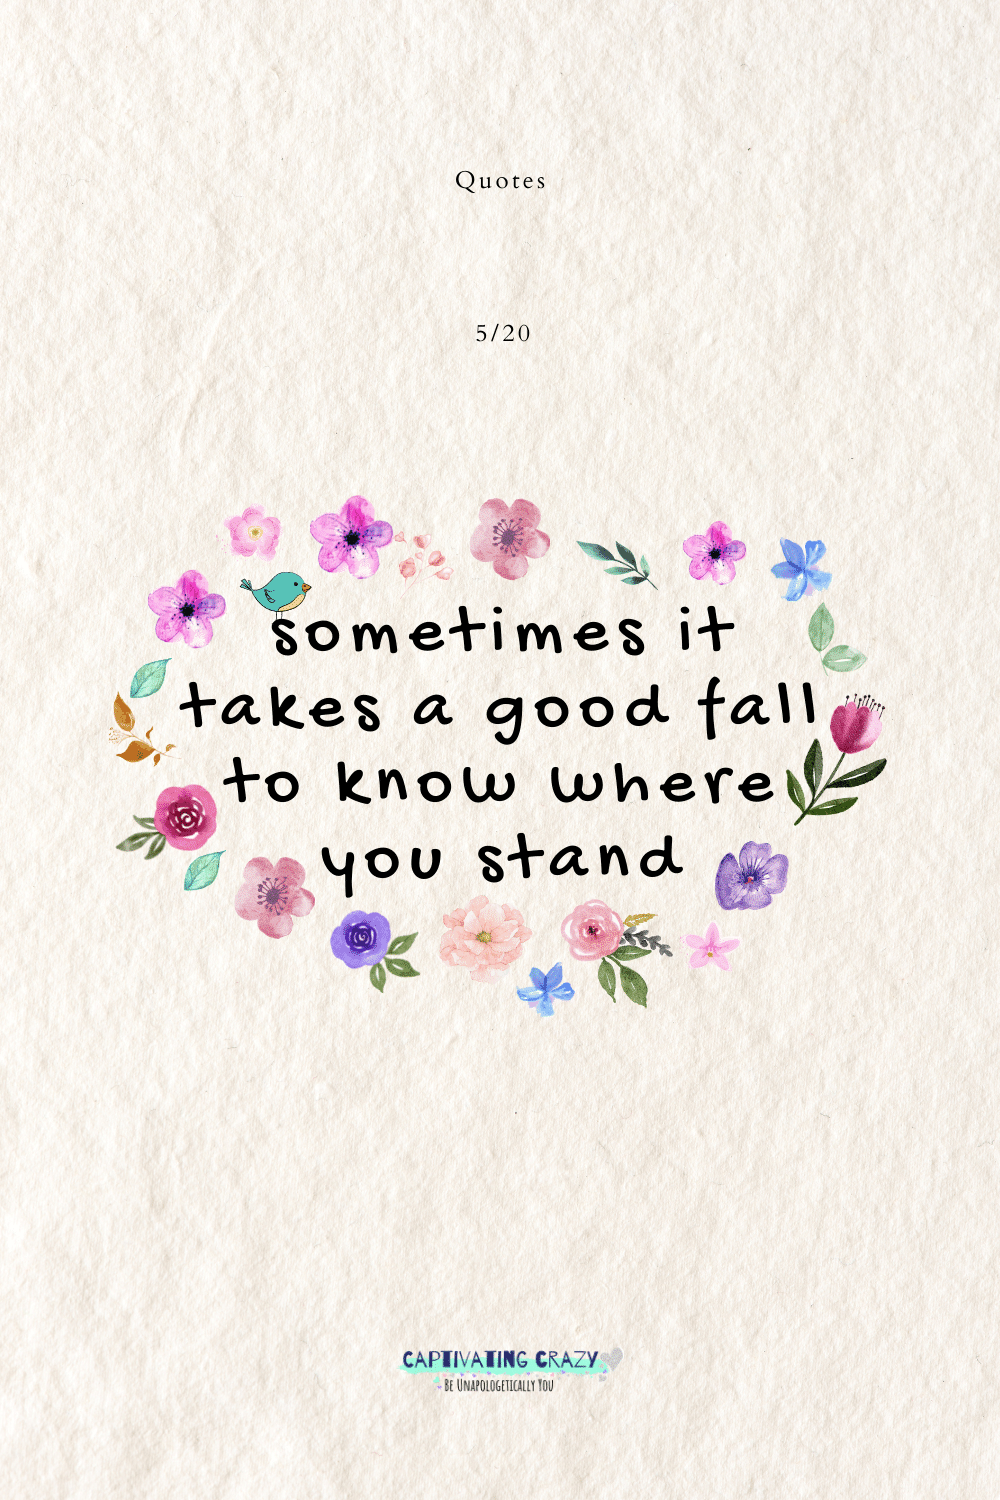 Sometimes it takes a good fall to find out where you stand.